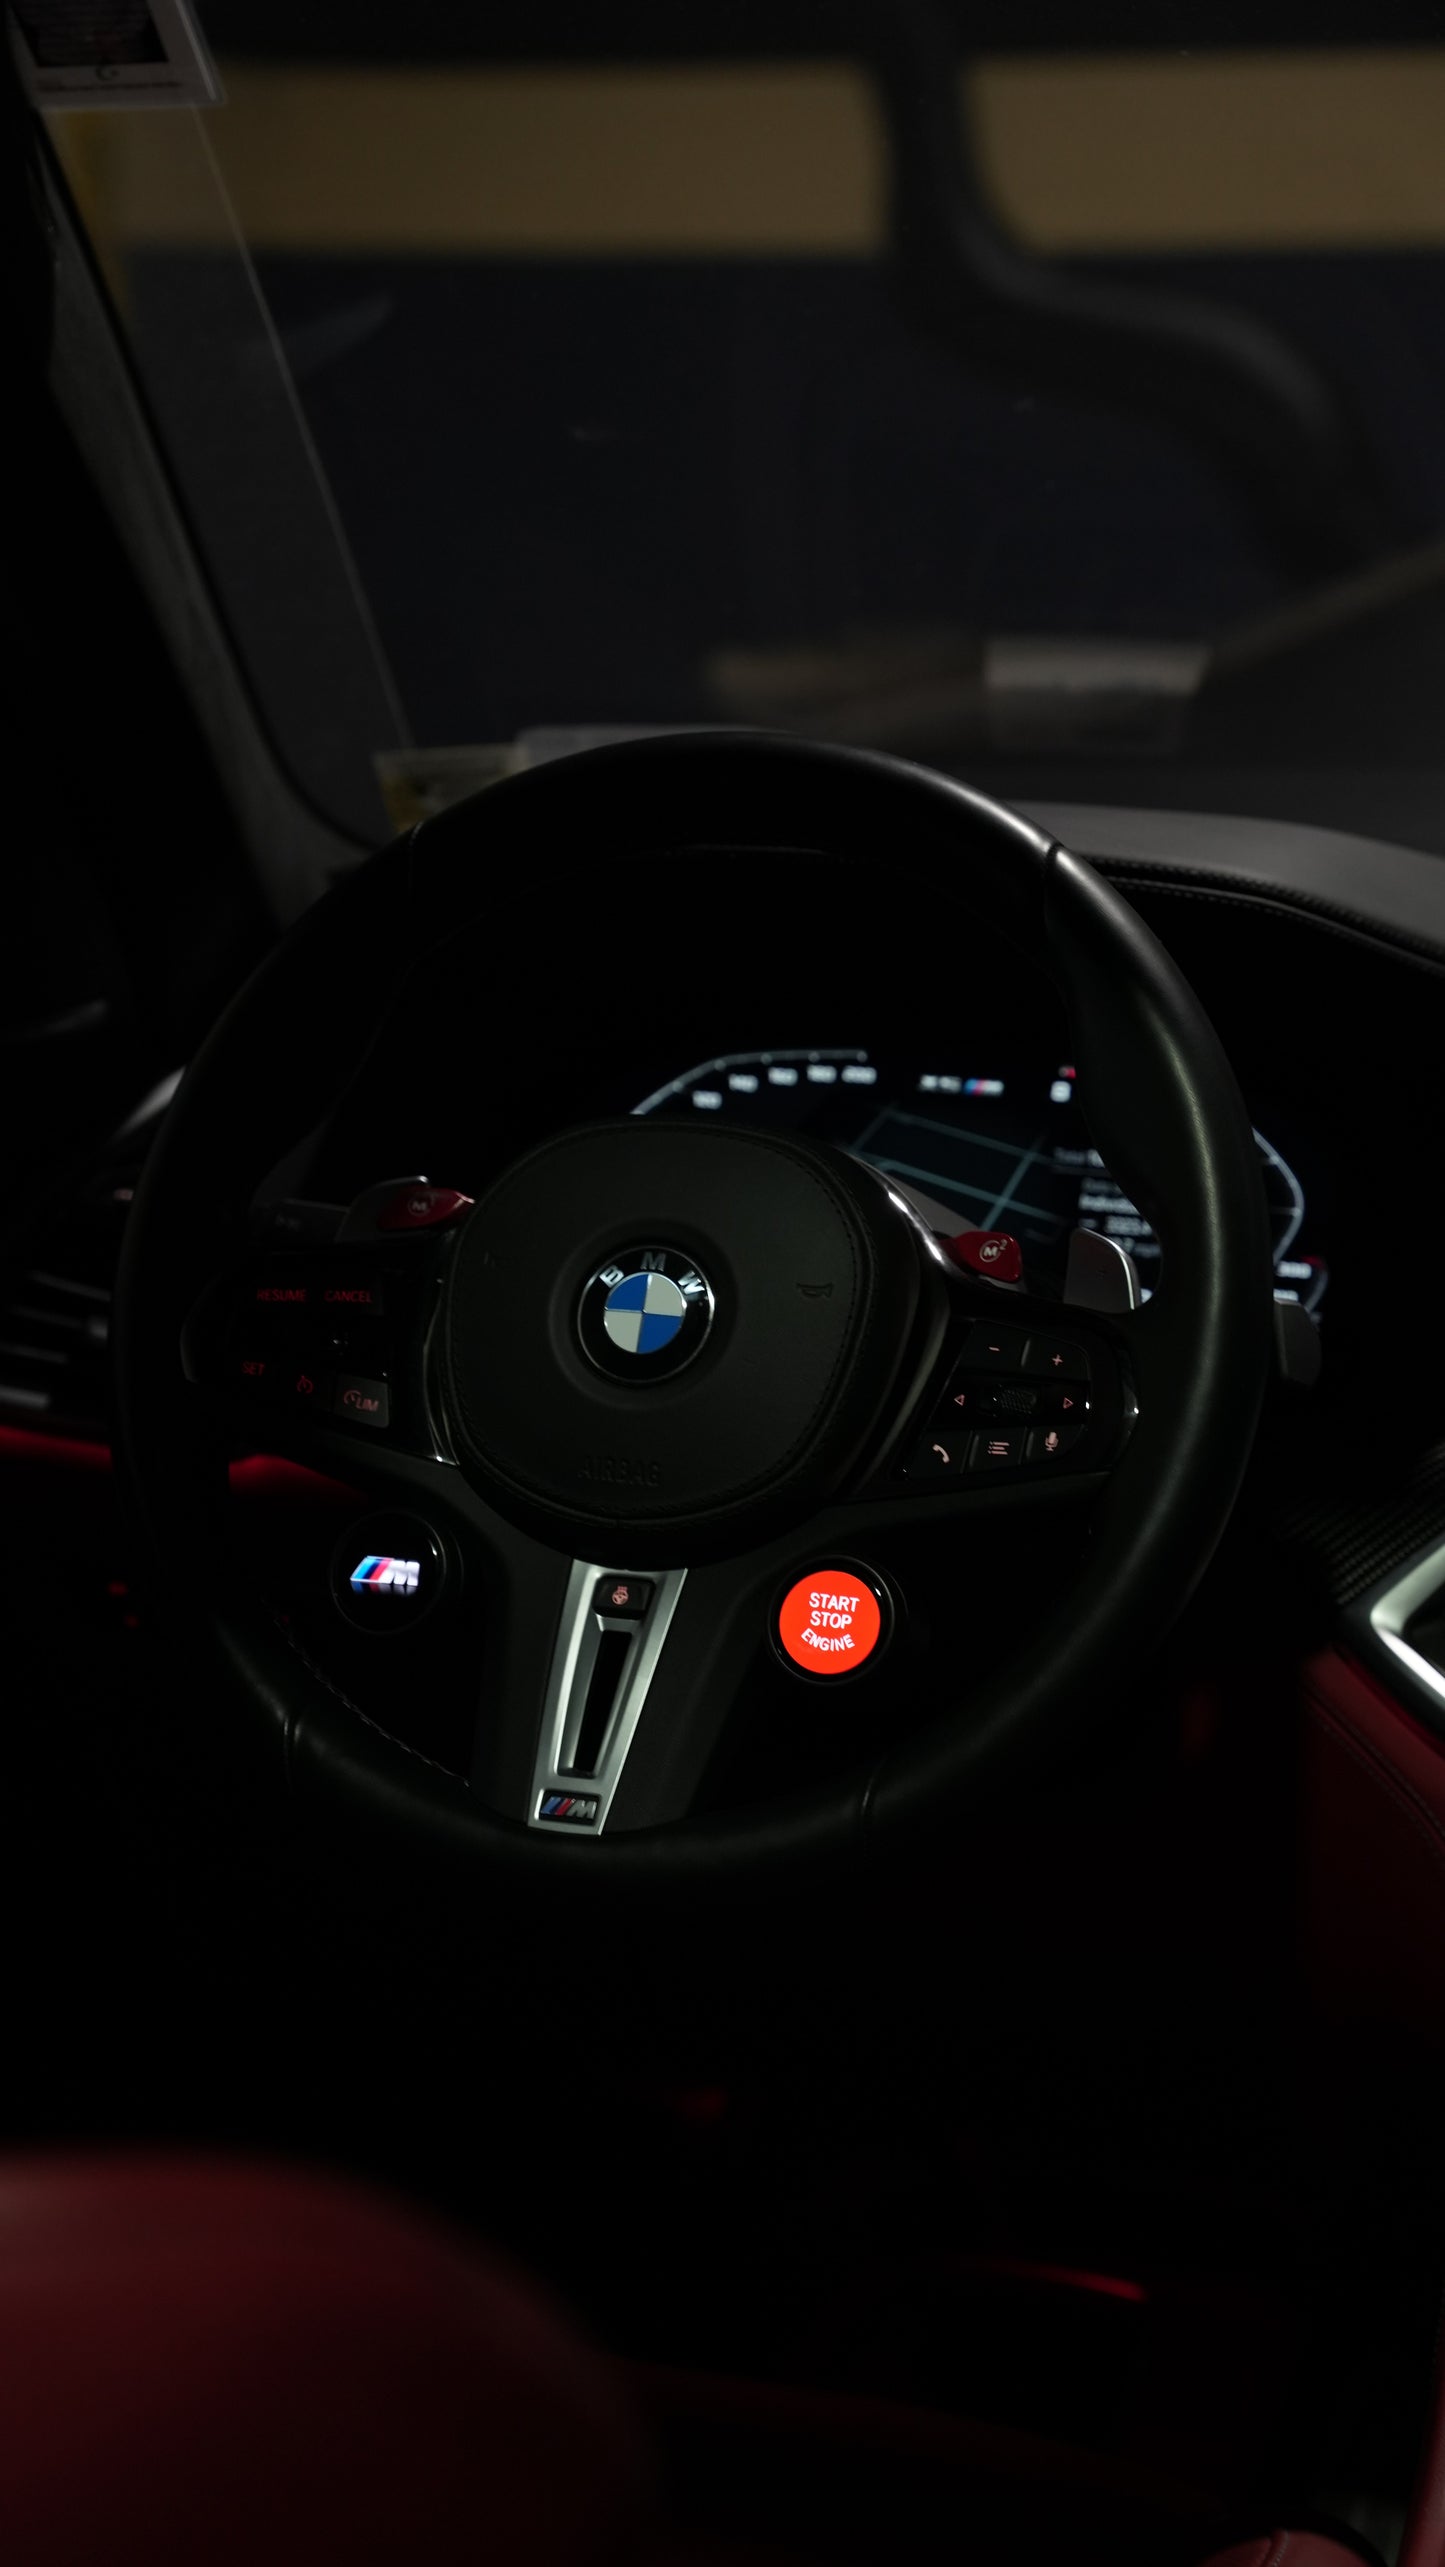 OLED Bmw steering wheel buttons